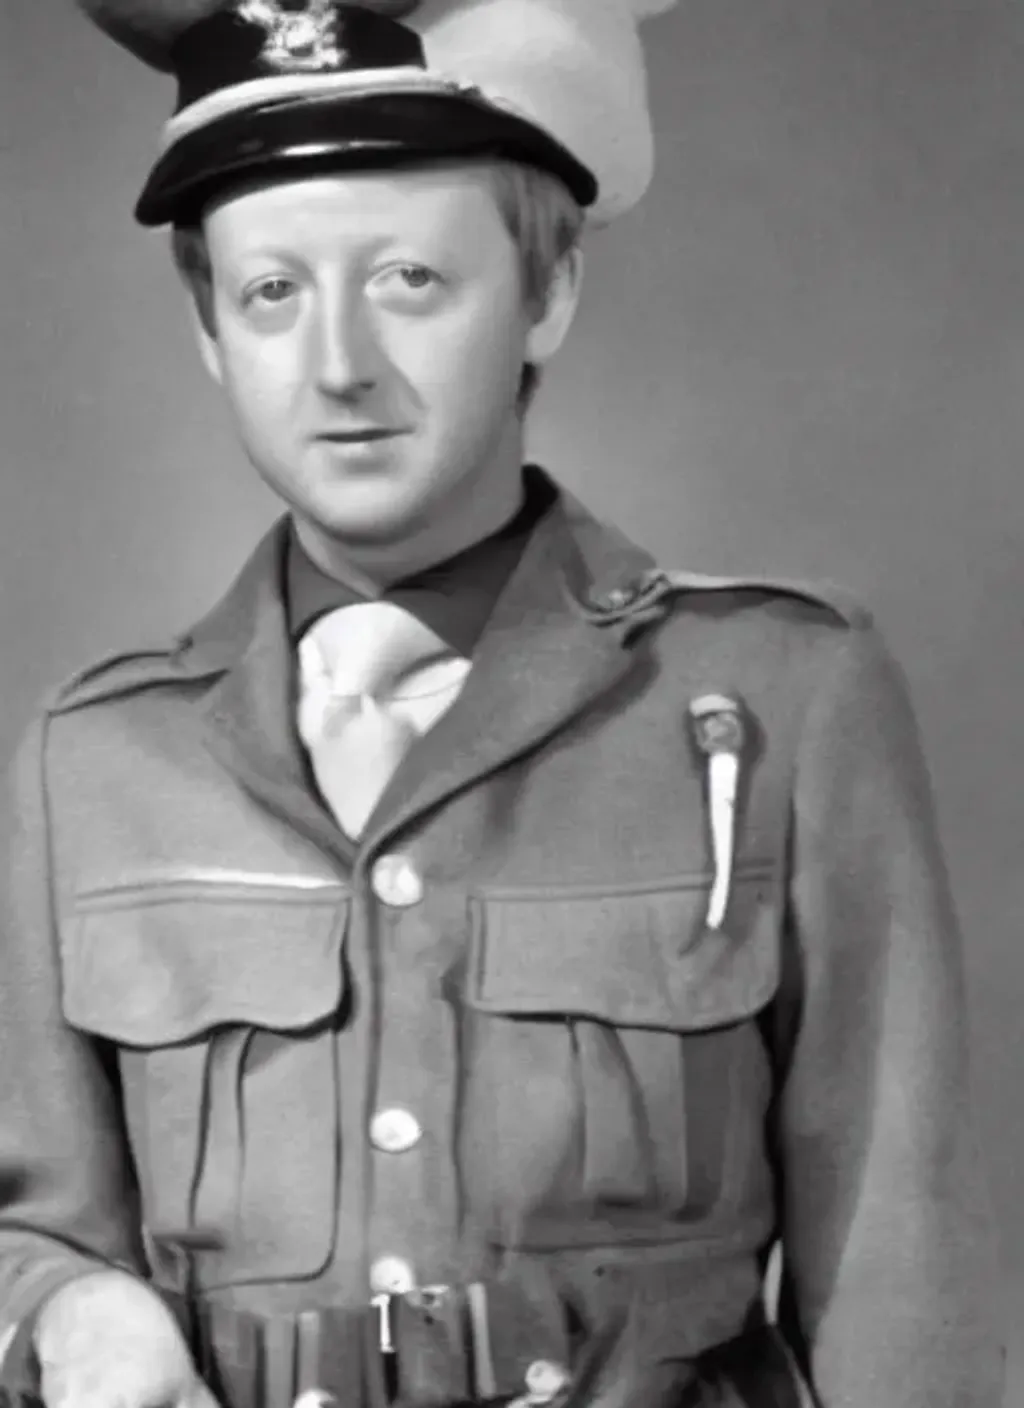 Prompt: Photograph of Tim Brooke-Taylor as a soldier in World War II, black and white